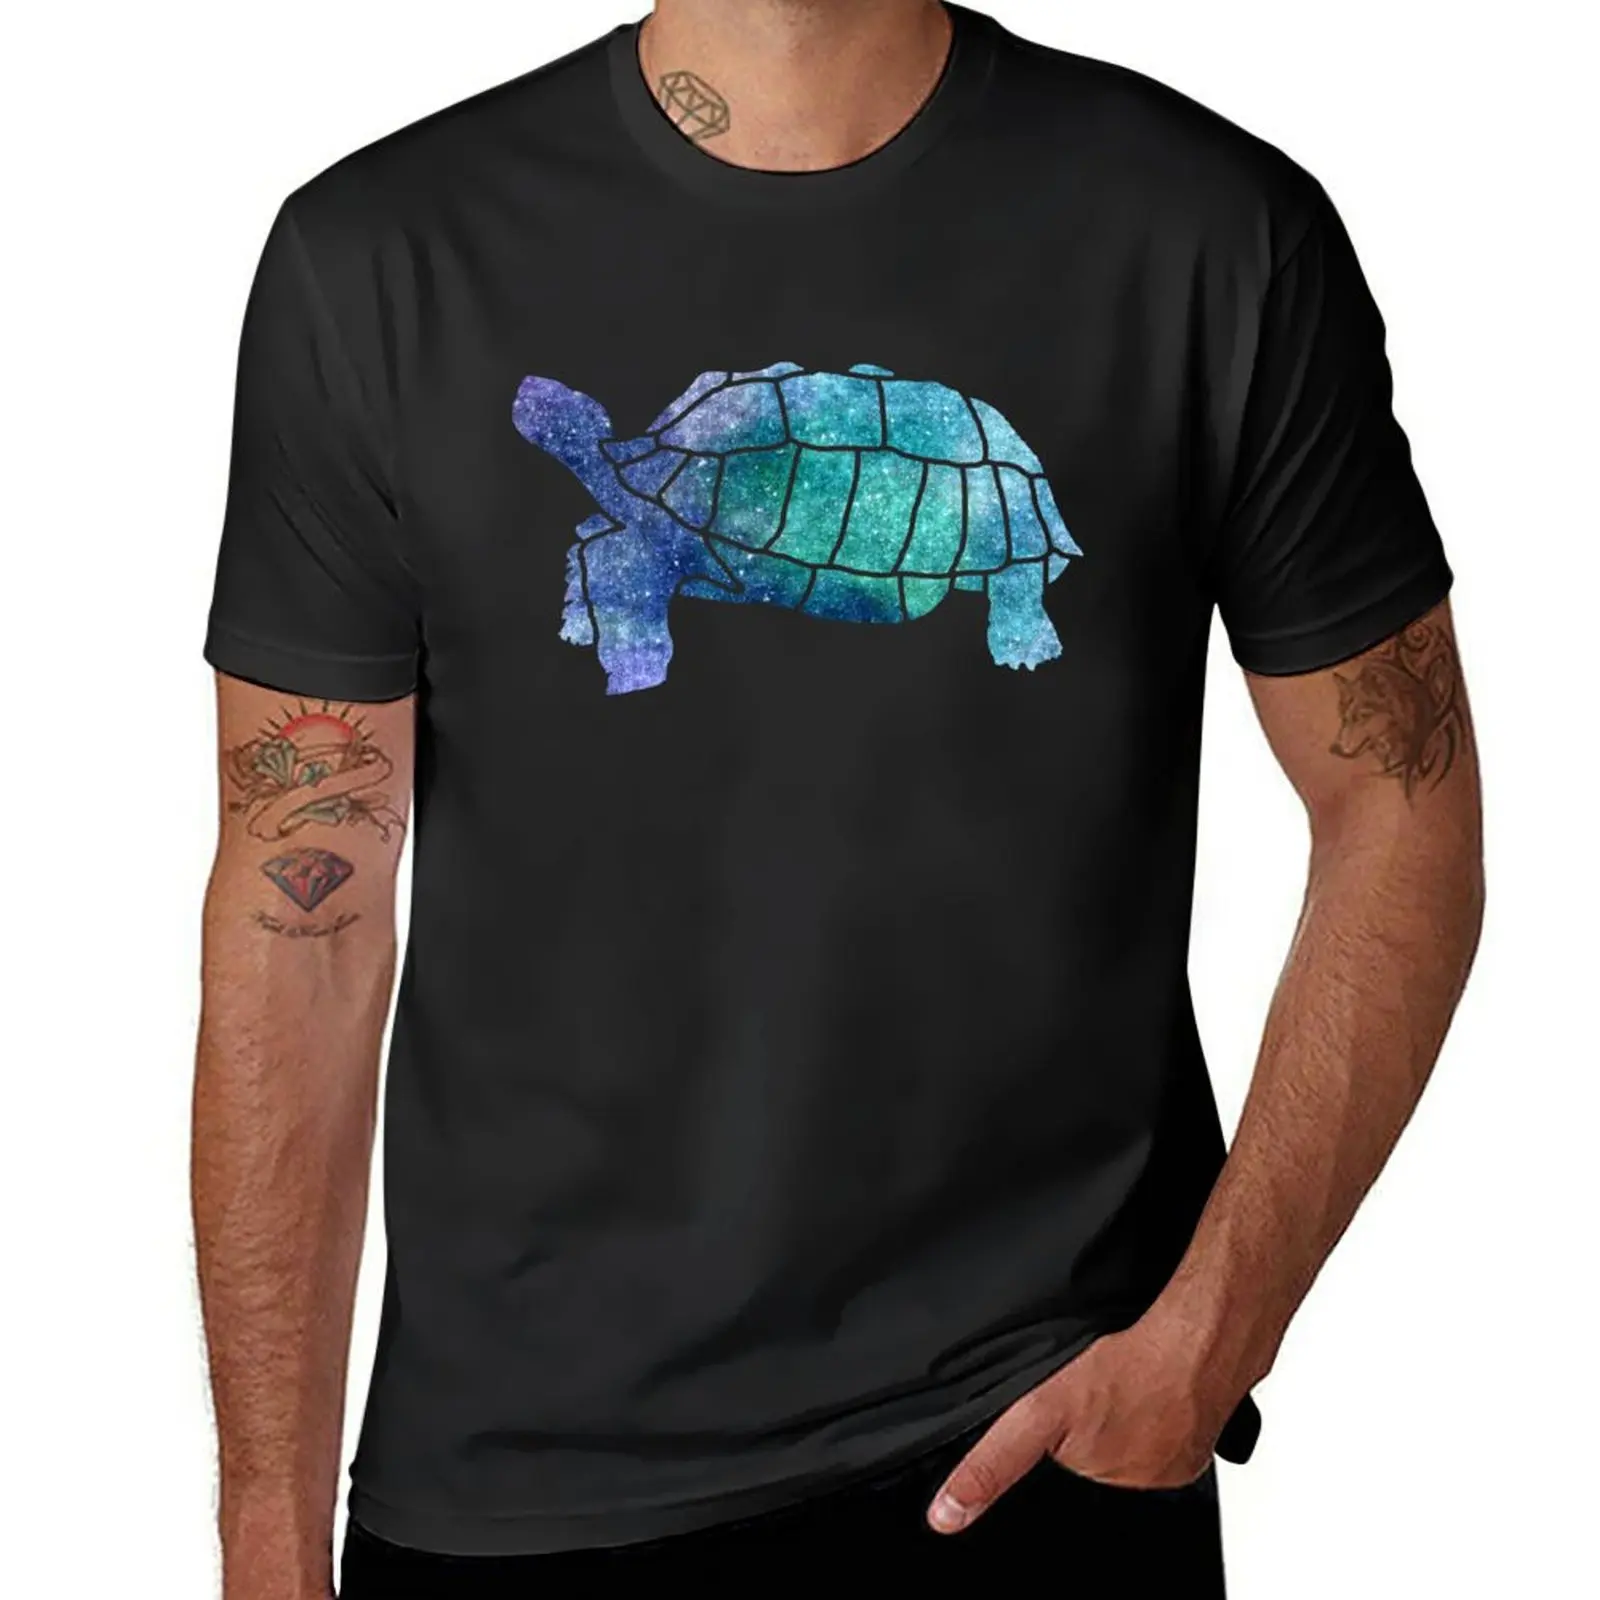 

New Sulcata Tortoise Silhouette (sparkles) T-Shirt Short sleeve tee funny t shirts mens tall t shirts